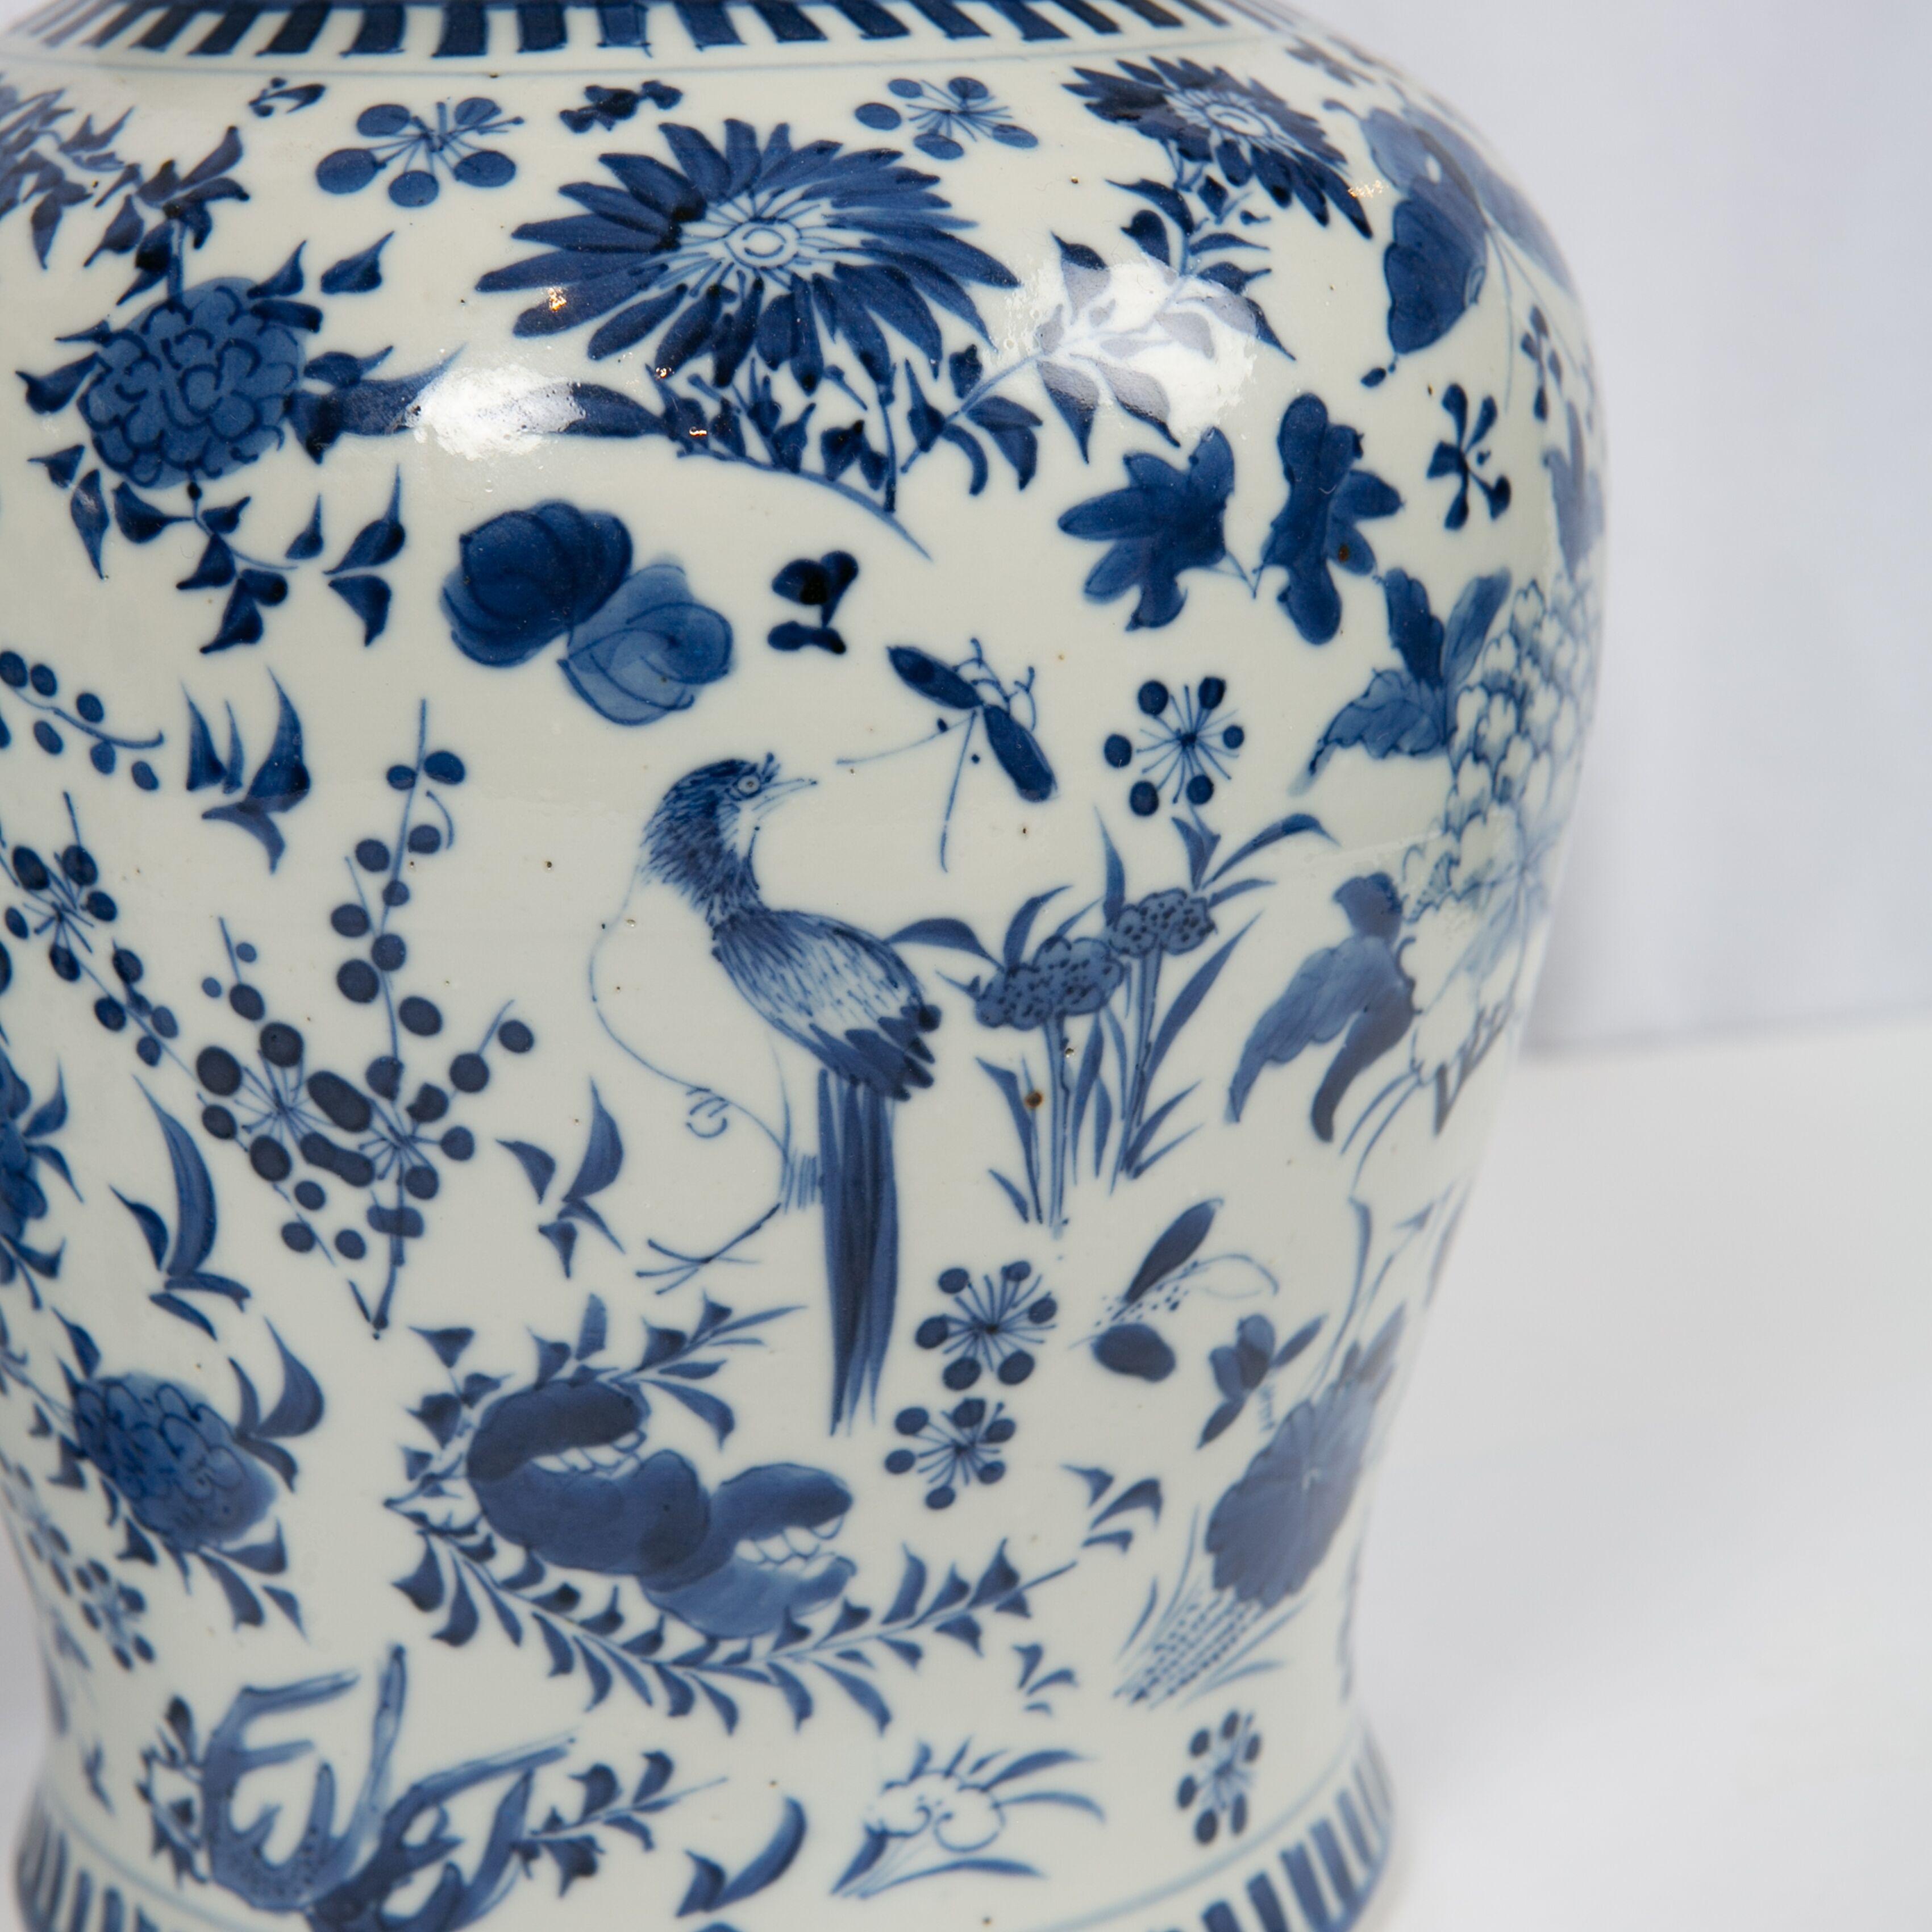 Pair of Chinese Porcelain Blue and White Covered Jars 19th Century Qing Dynasty 3